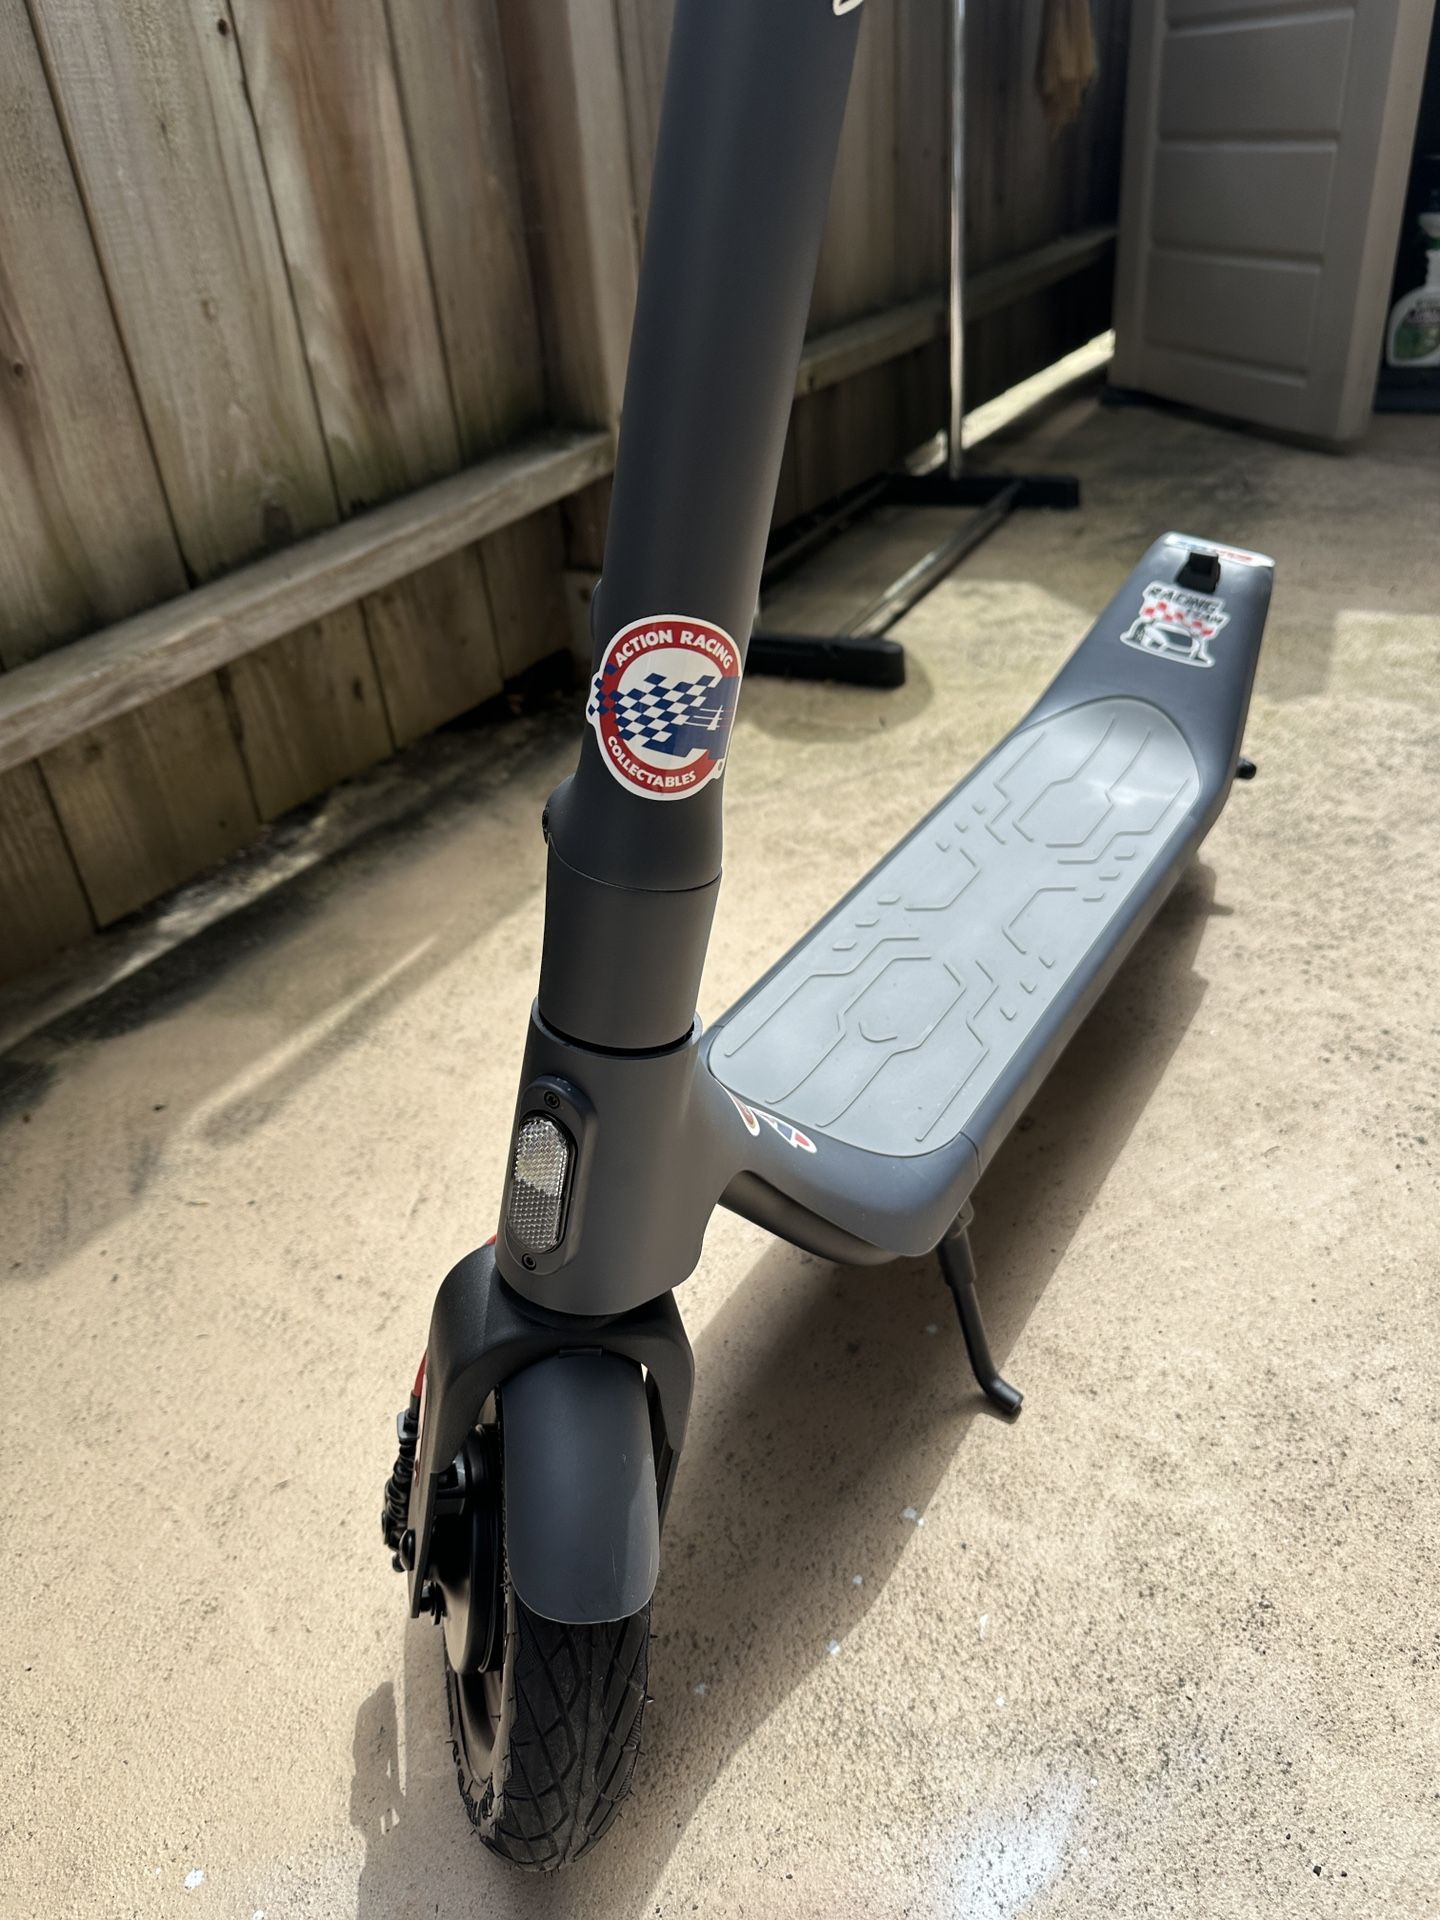 Smart Electric Scooter - Max 15.5/18.6mile Range, 9" Pneumatic Tire, 15.5mph Power by 350W Moter, 220/250/265lbs, APP Digital Display and Cruise Contr